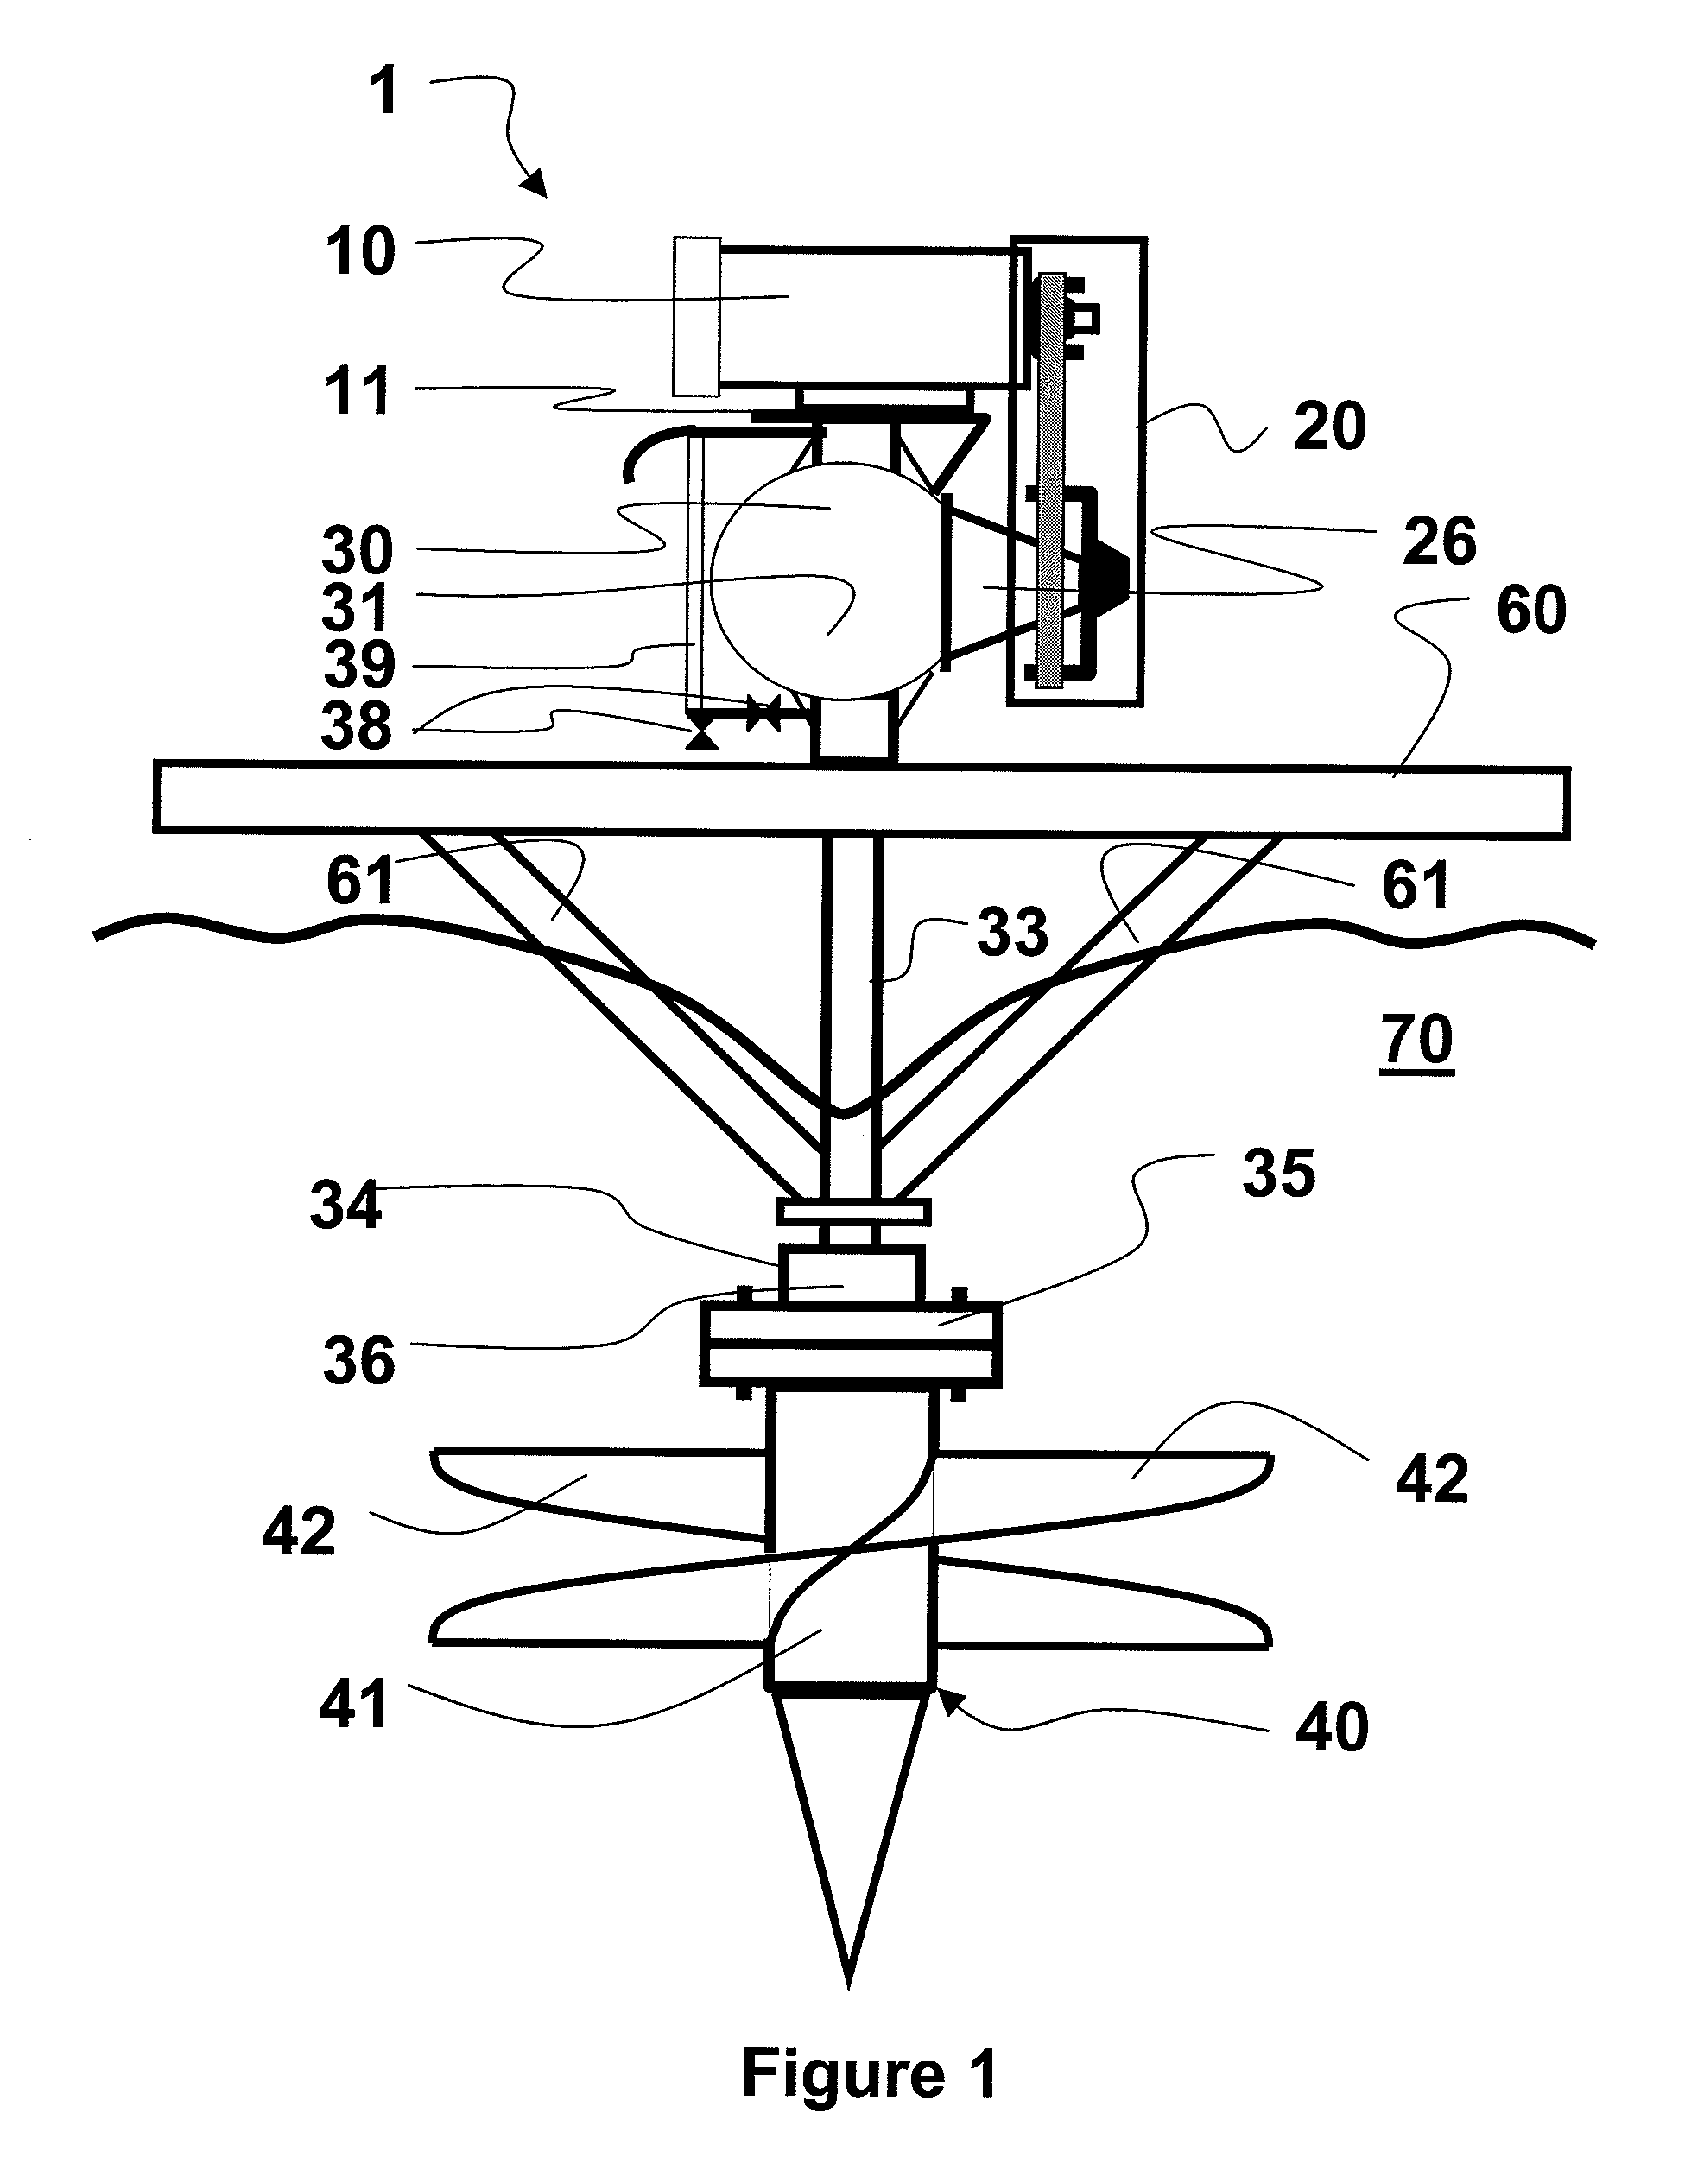 Apparatus for mixing gasses and liquids